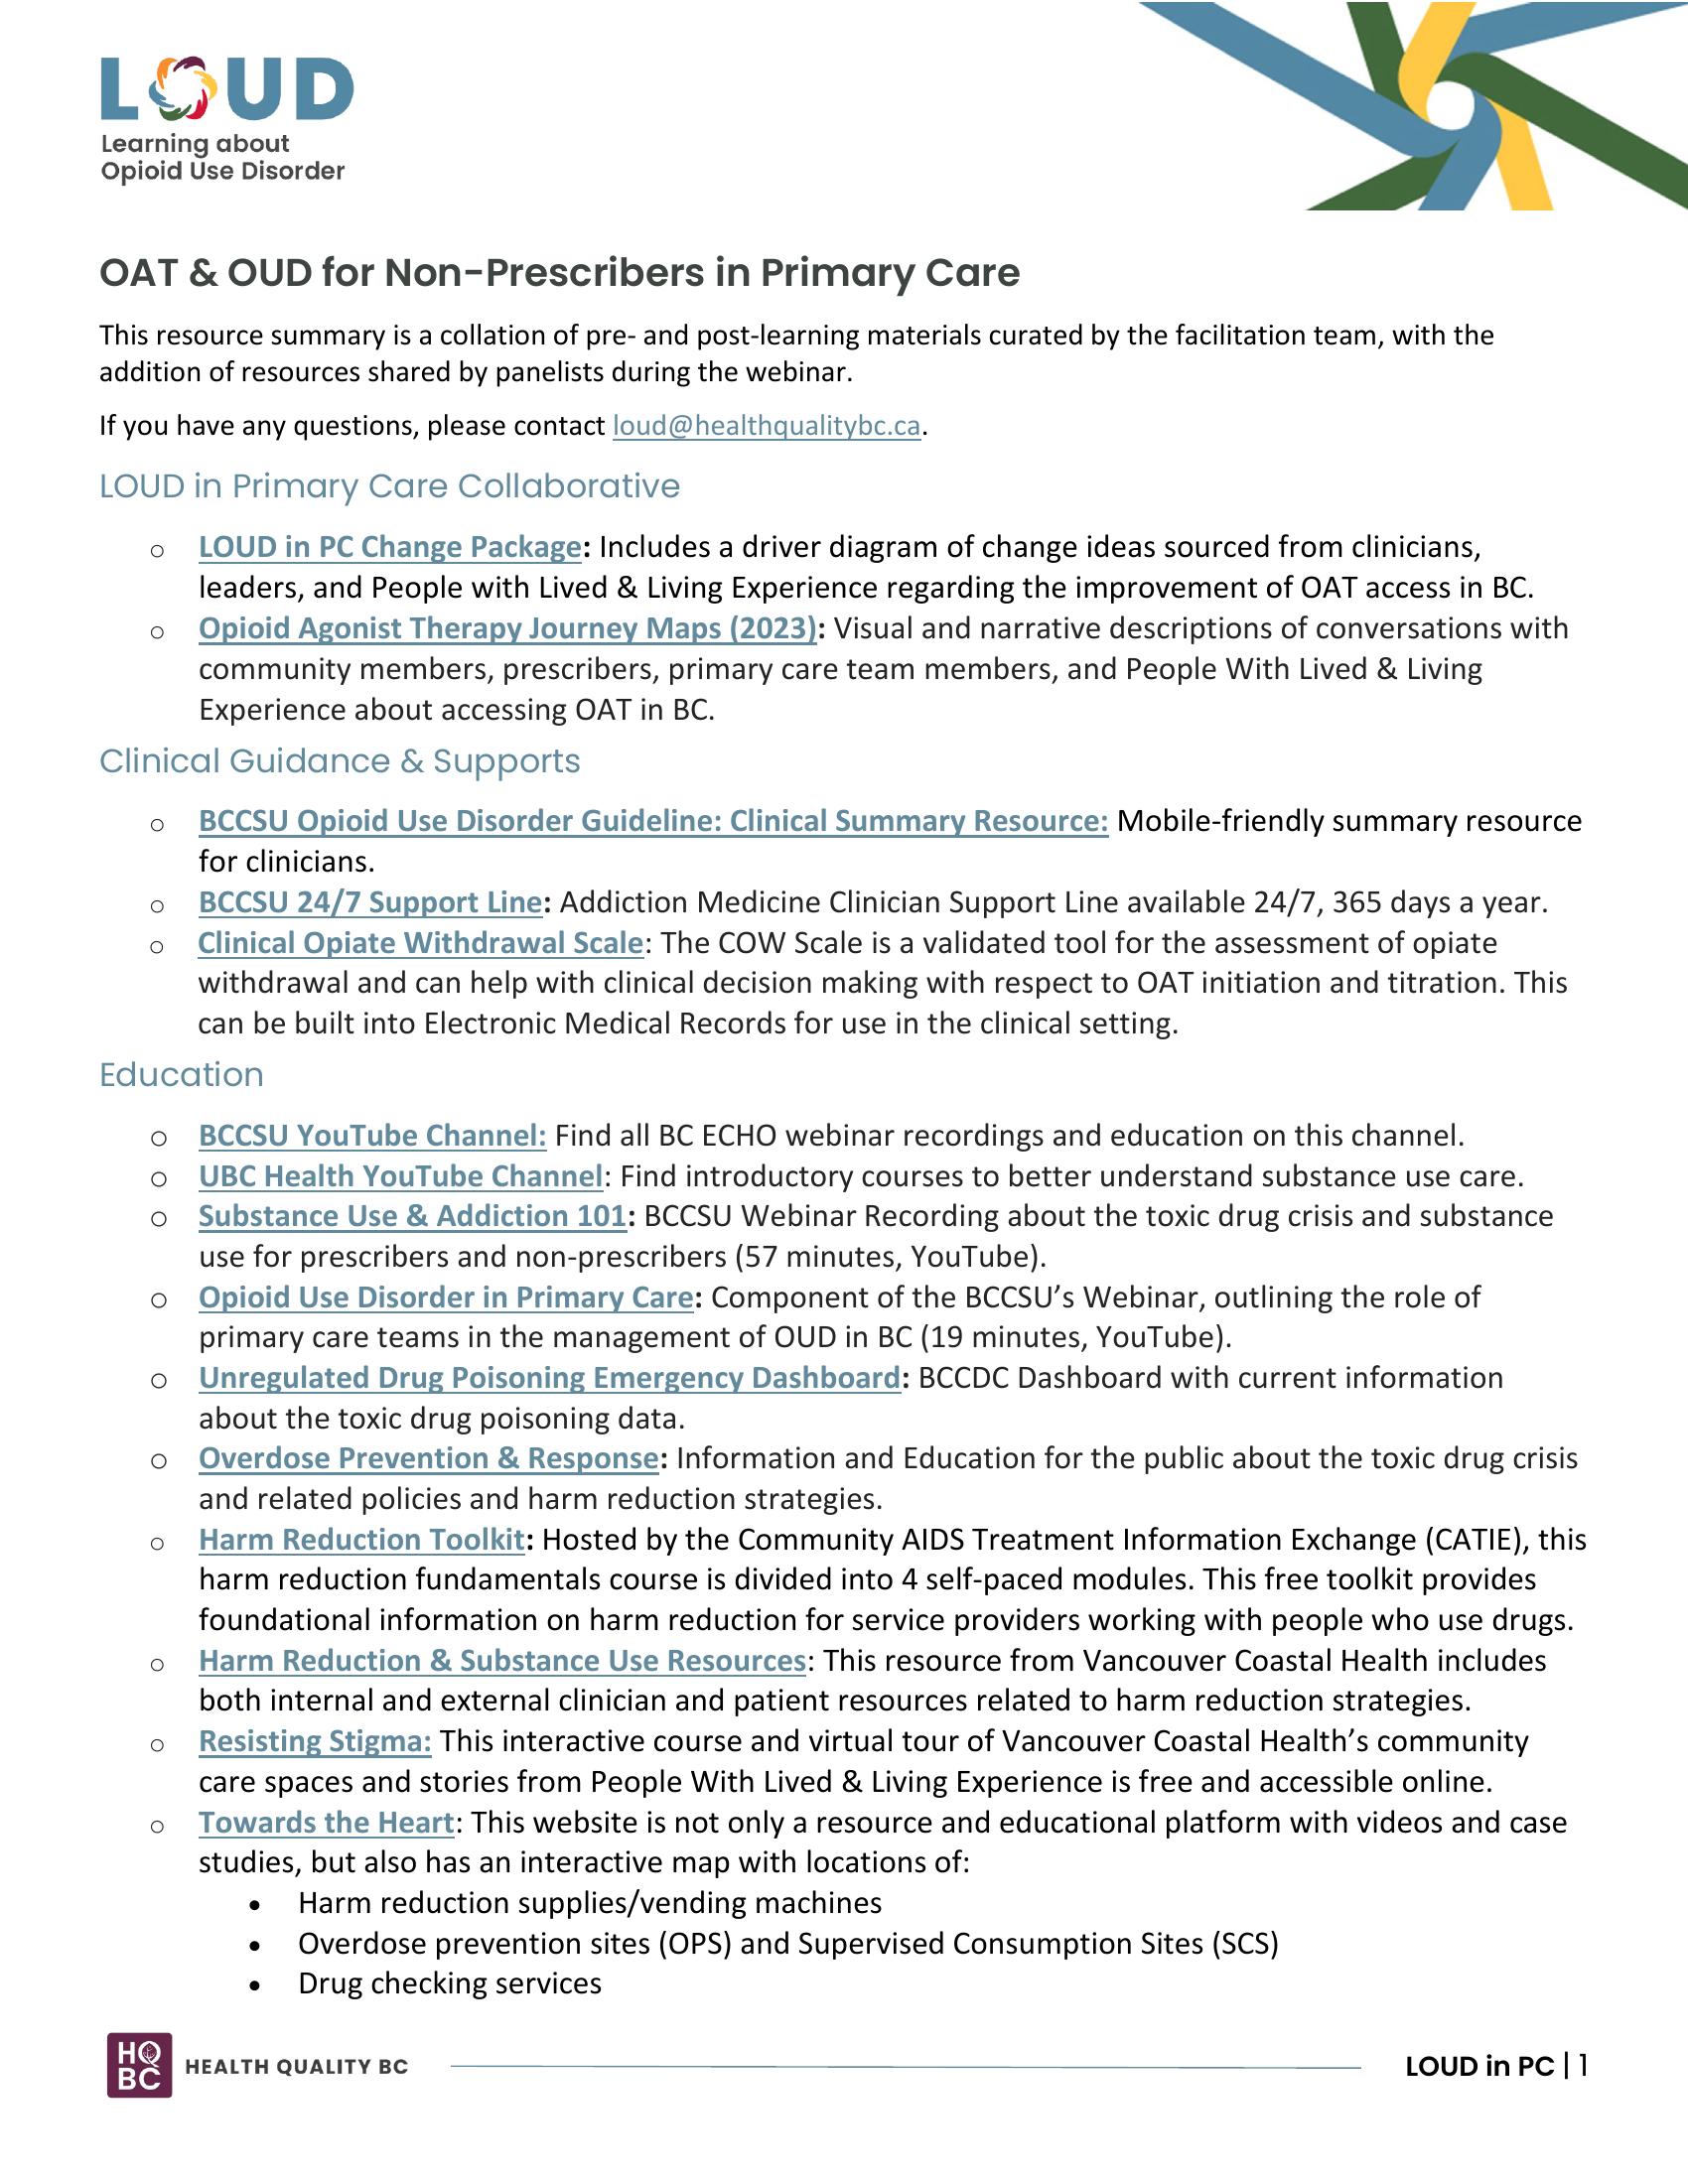 OUD and OAT for Non-Prescribers in Primary Care Apr 18 - Resource Summary Thumbnail